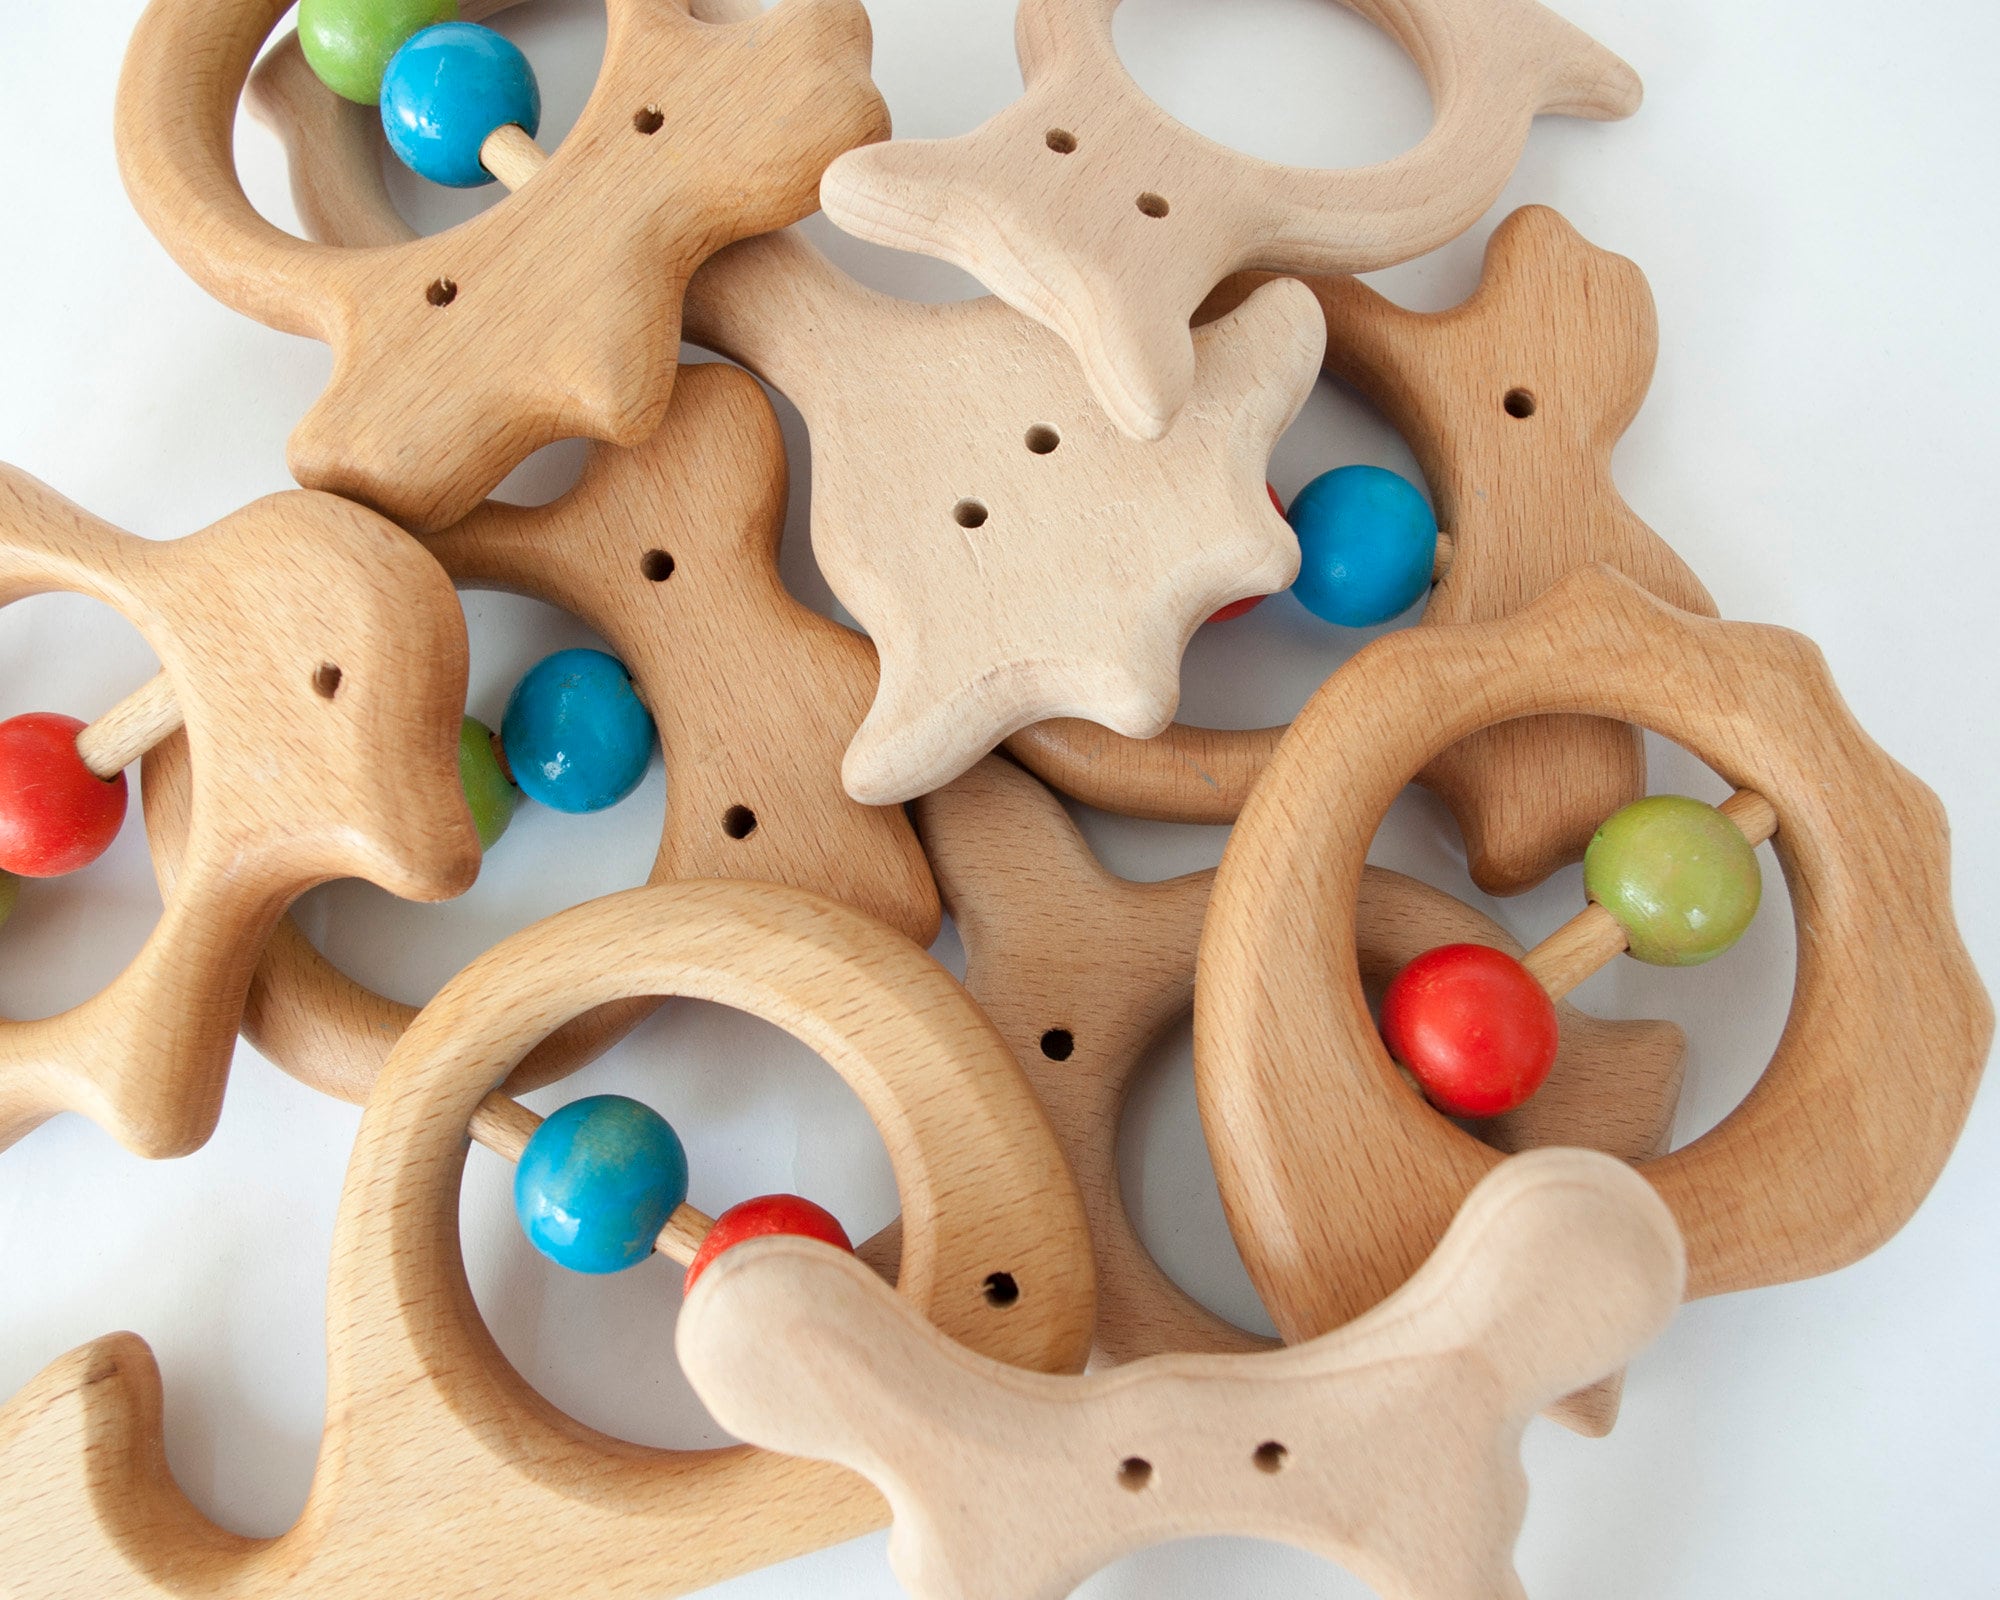 Promise Babe 11pc Organic Wooden Teethers Natural Wood Teething Jewelry Accessories Fine Motor Development Montessori Toys Christmas/Shower Gift 